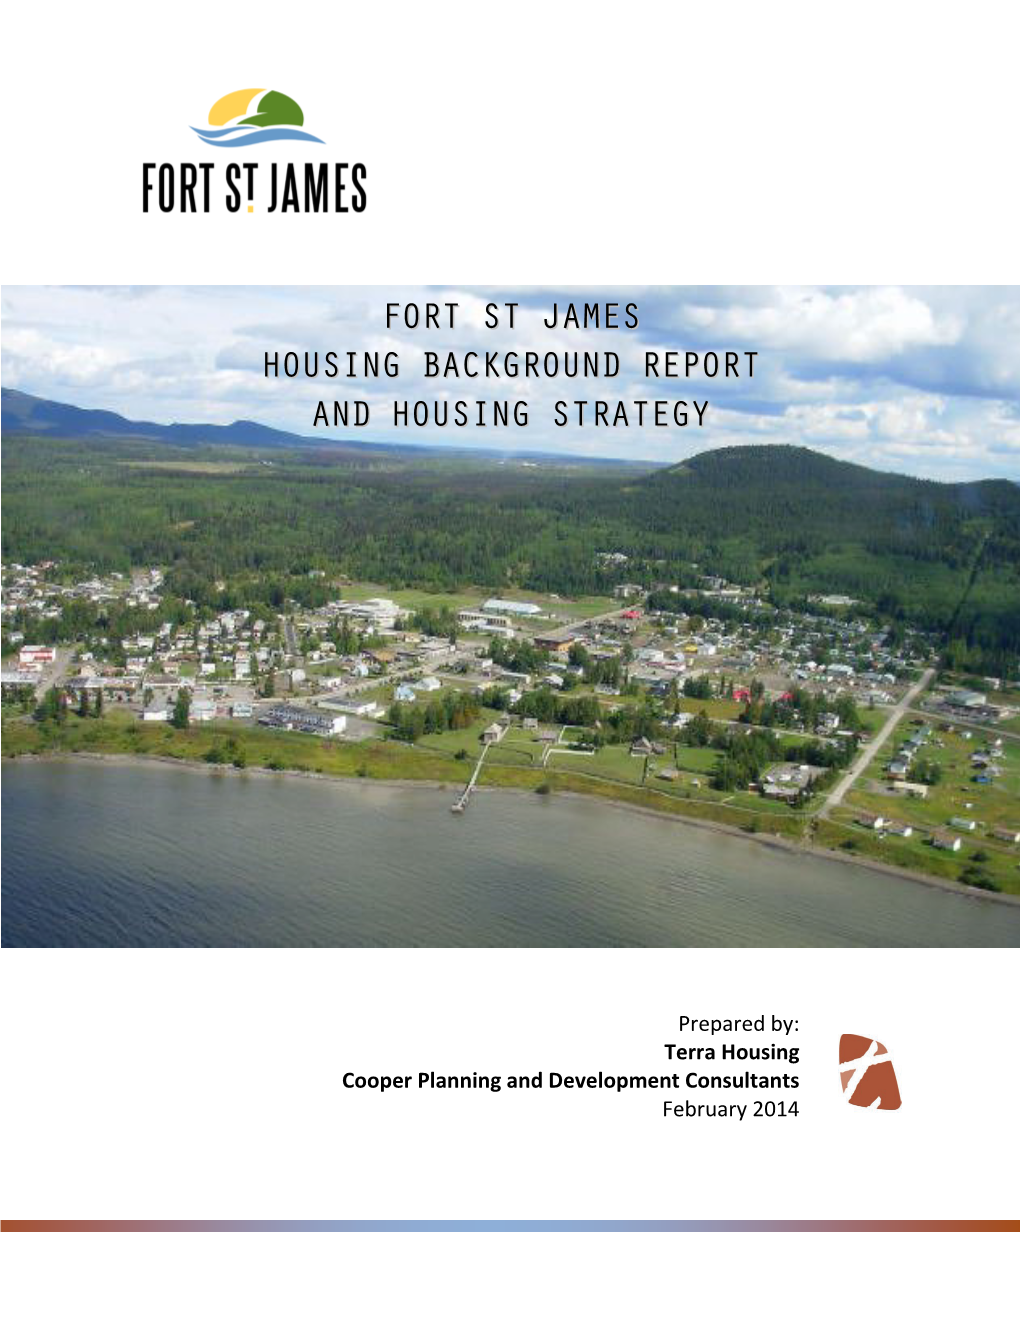 Fort St James Housing Background Report and Housing Strategy